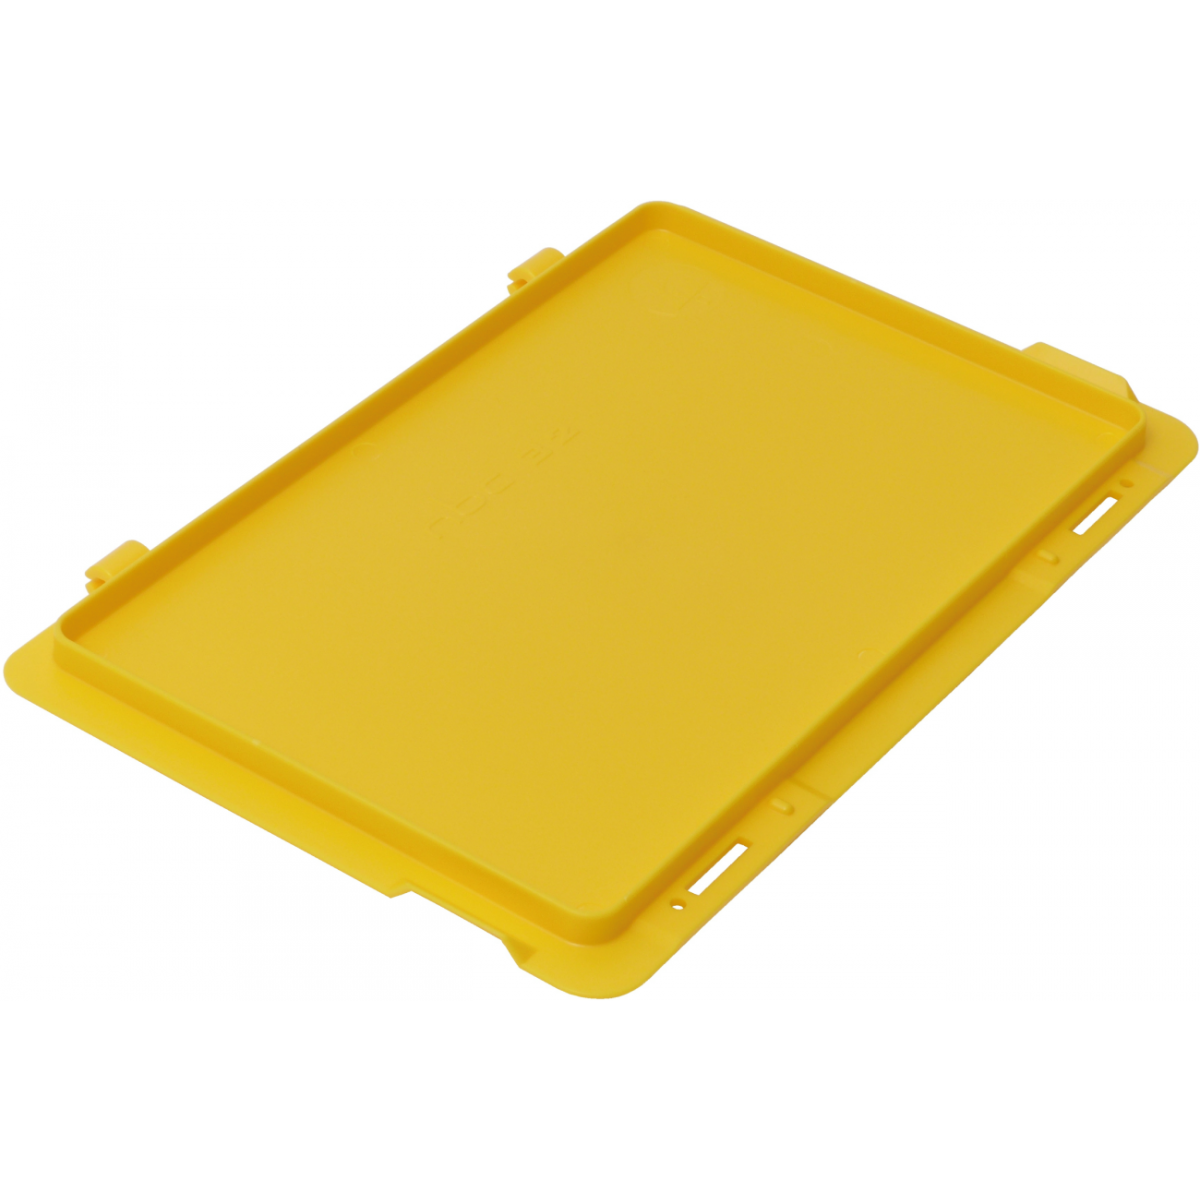 Color:yellow, External dimensions:300 x 200 mm